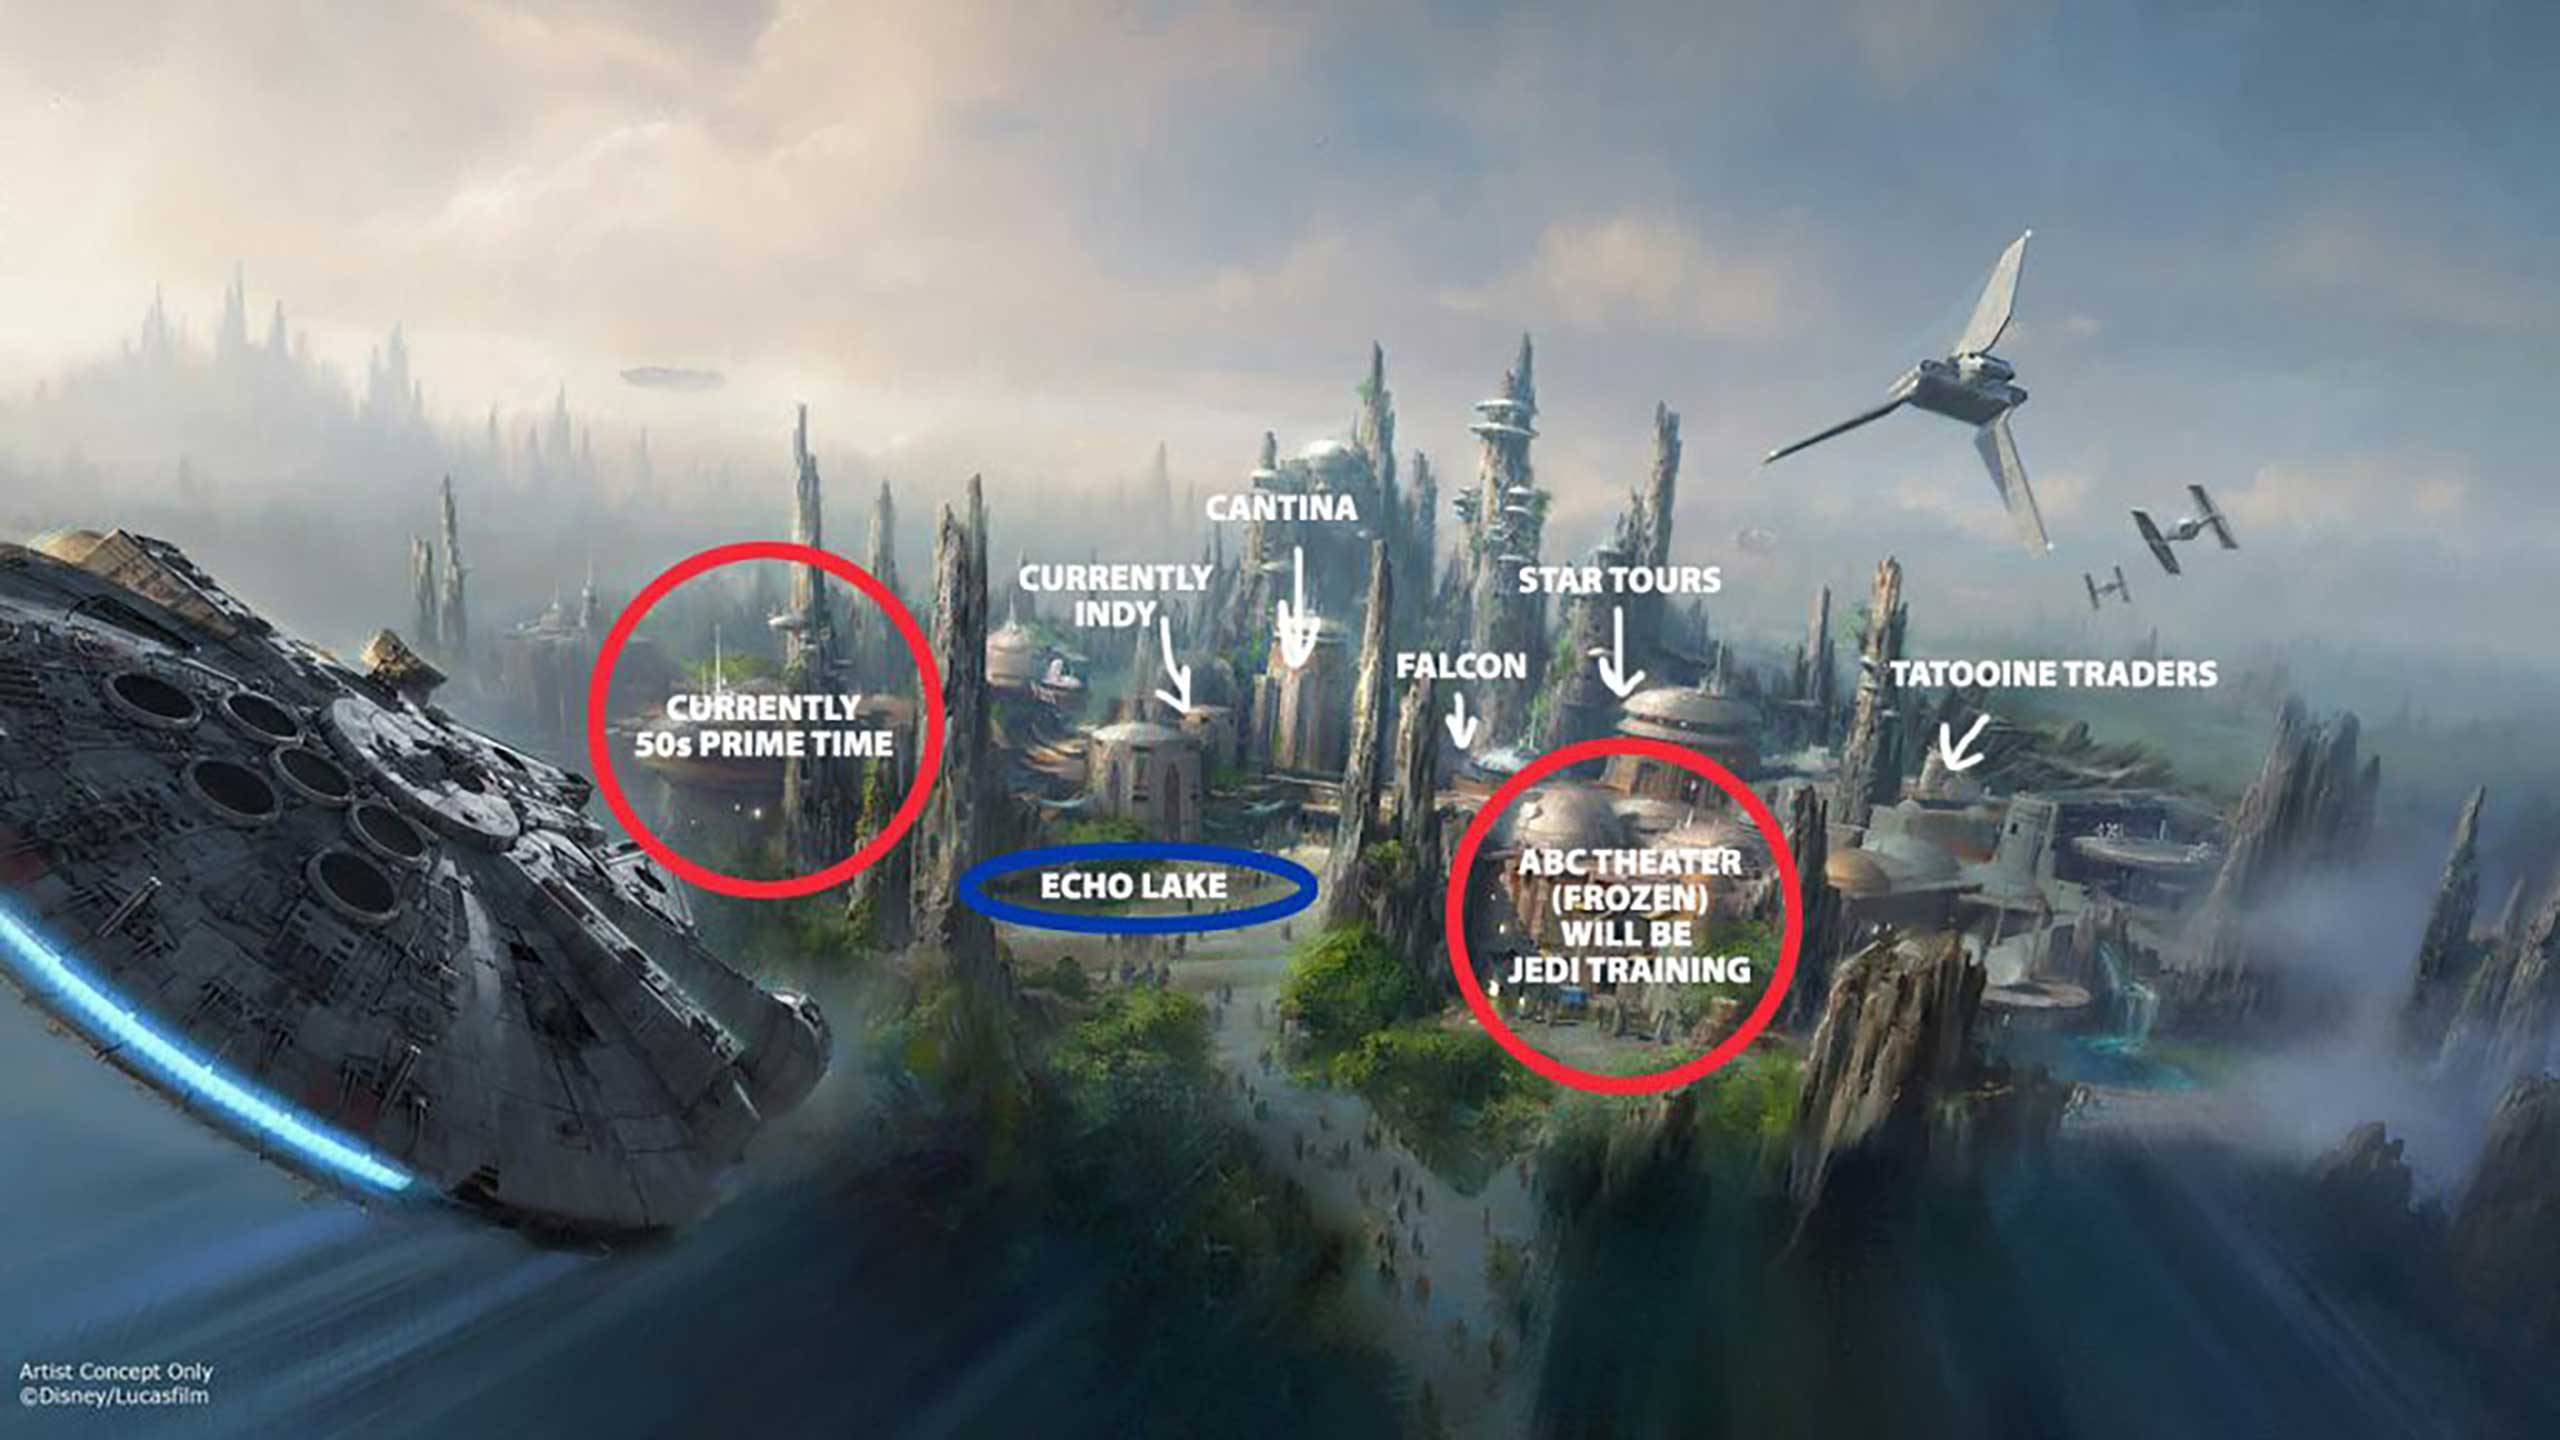 Possible Star Wars Land layout at Disney's Hollywood Studios from 2015. By Ignohippo.